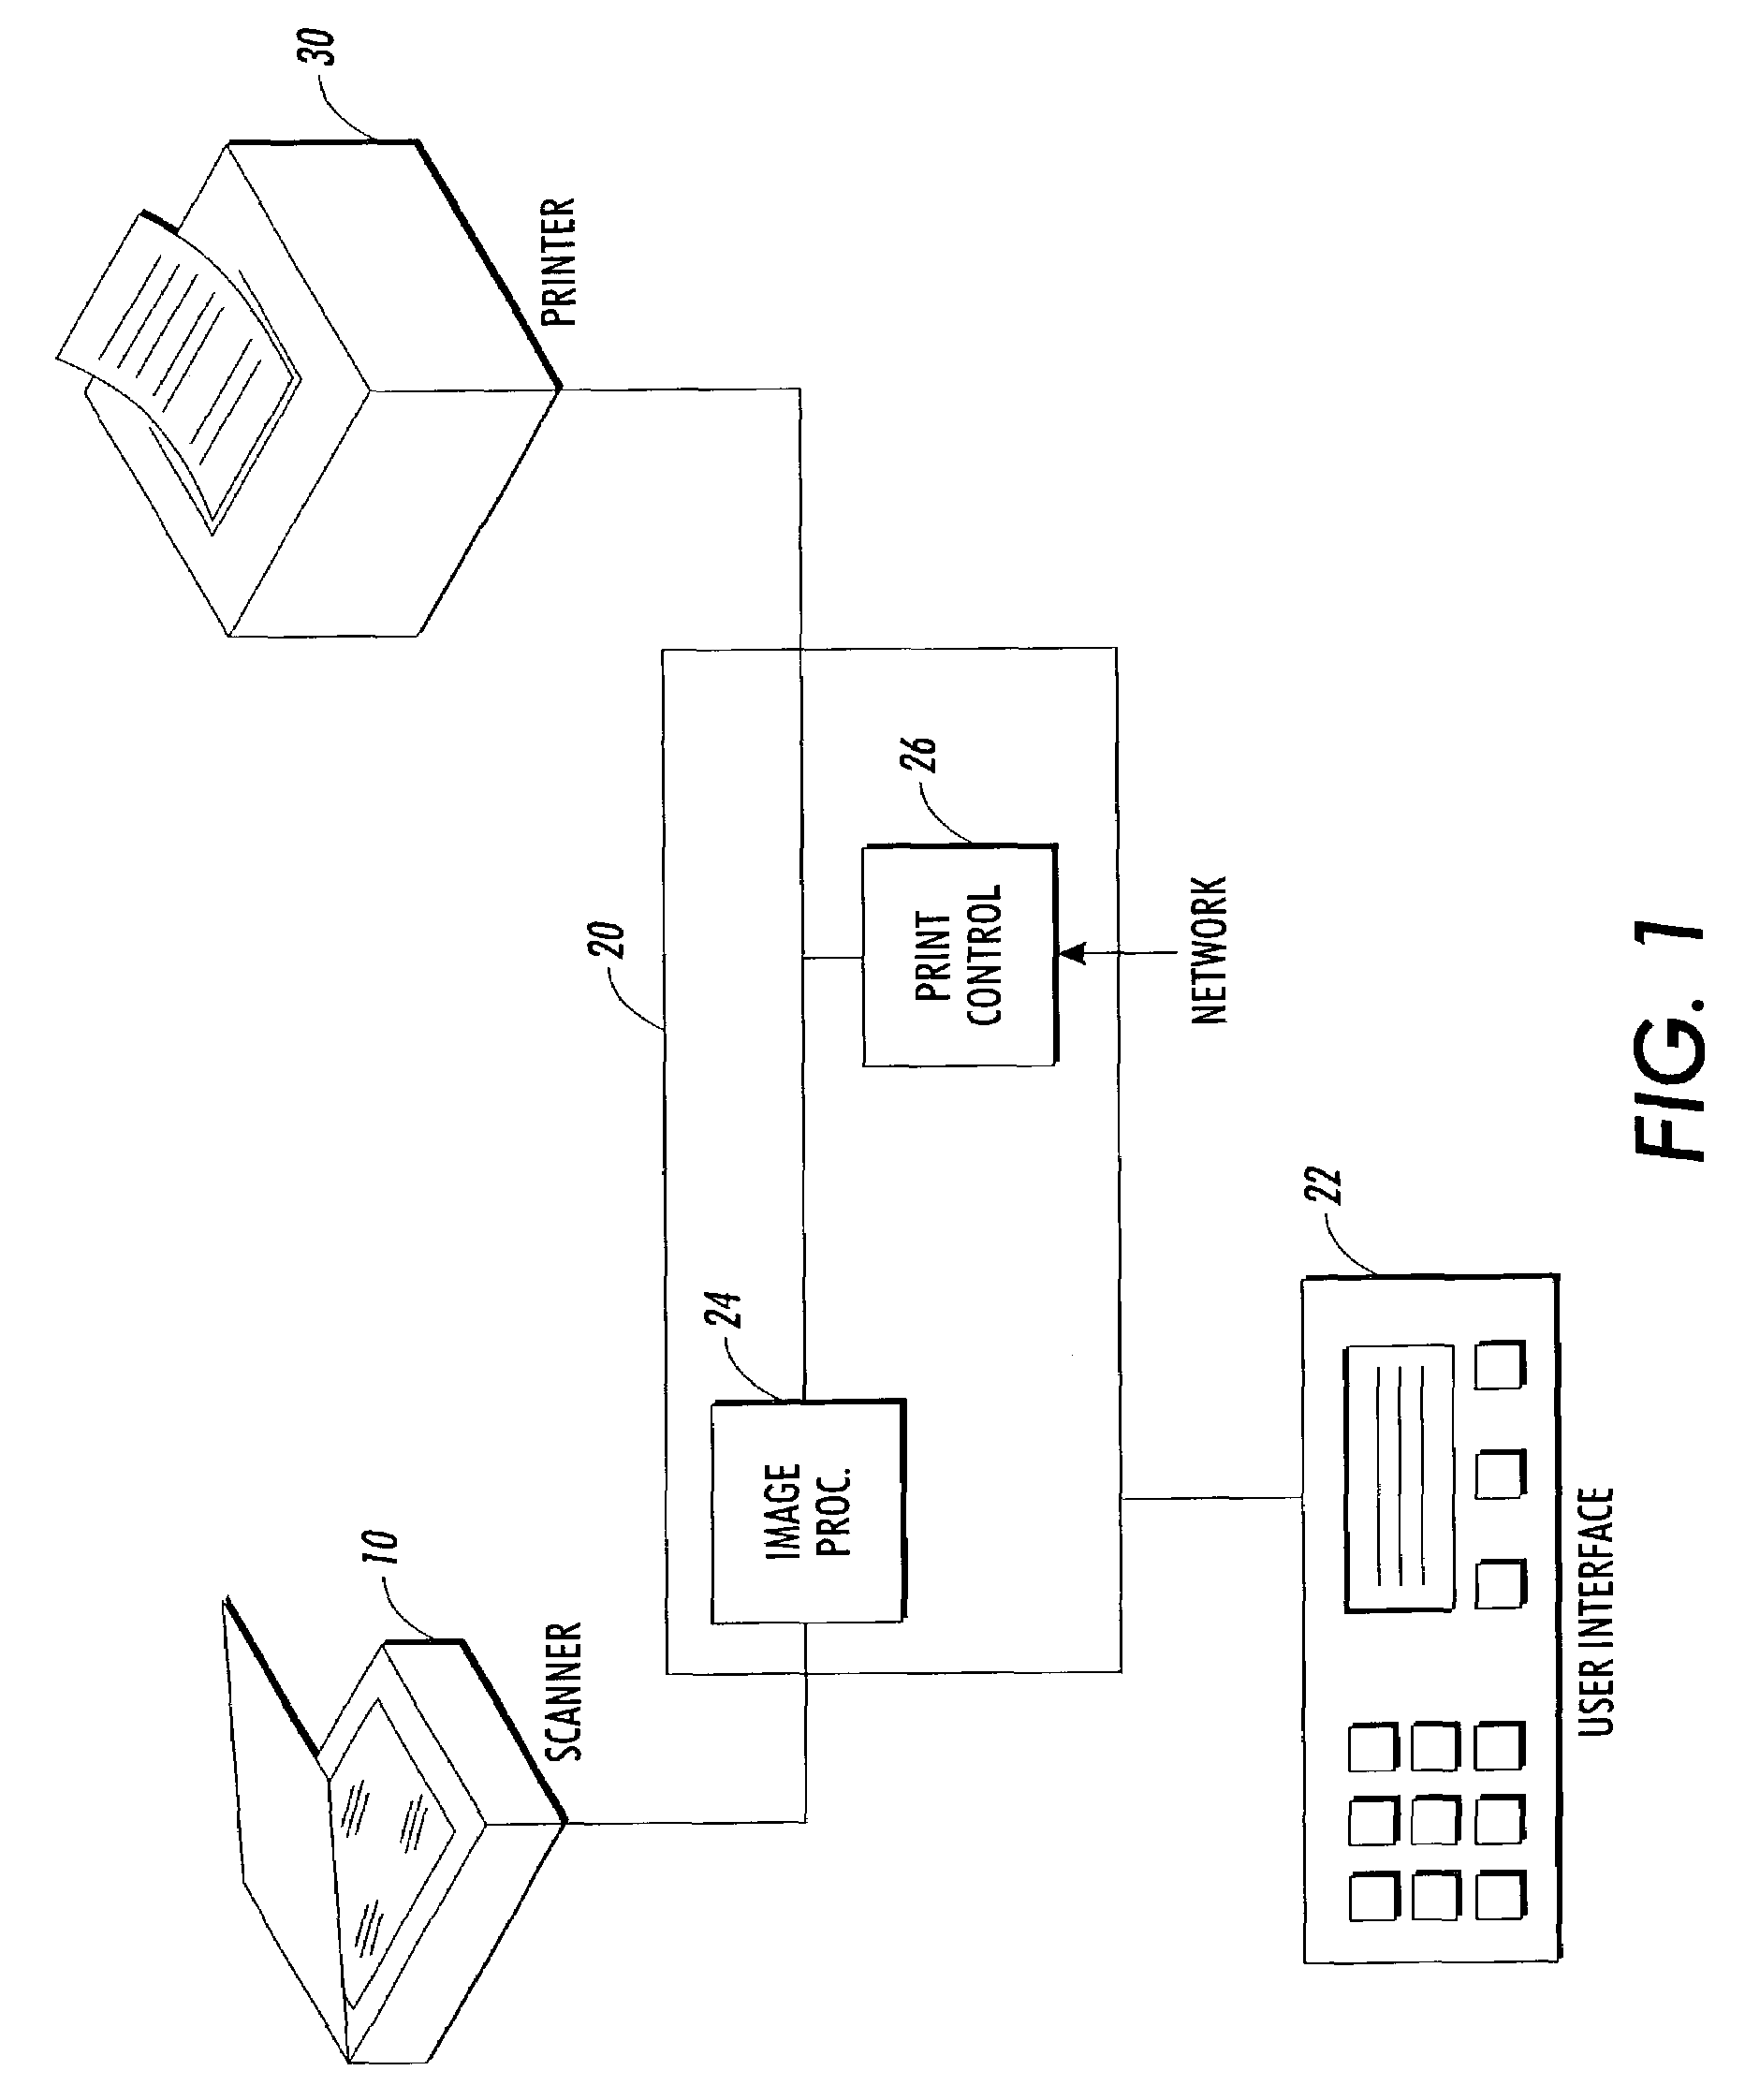 Method and apparatus for calibration of a color printer